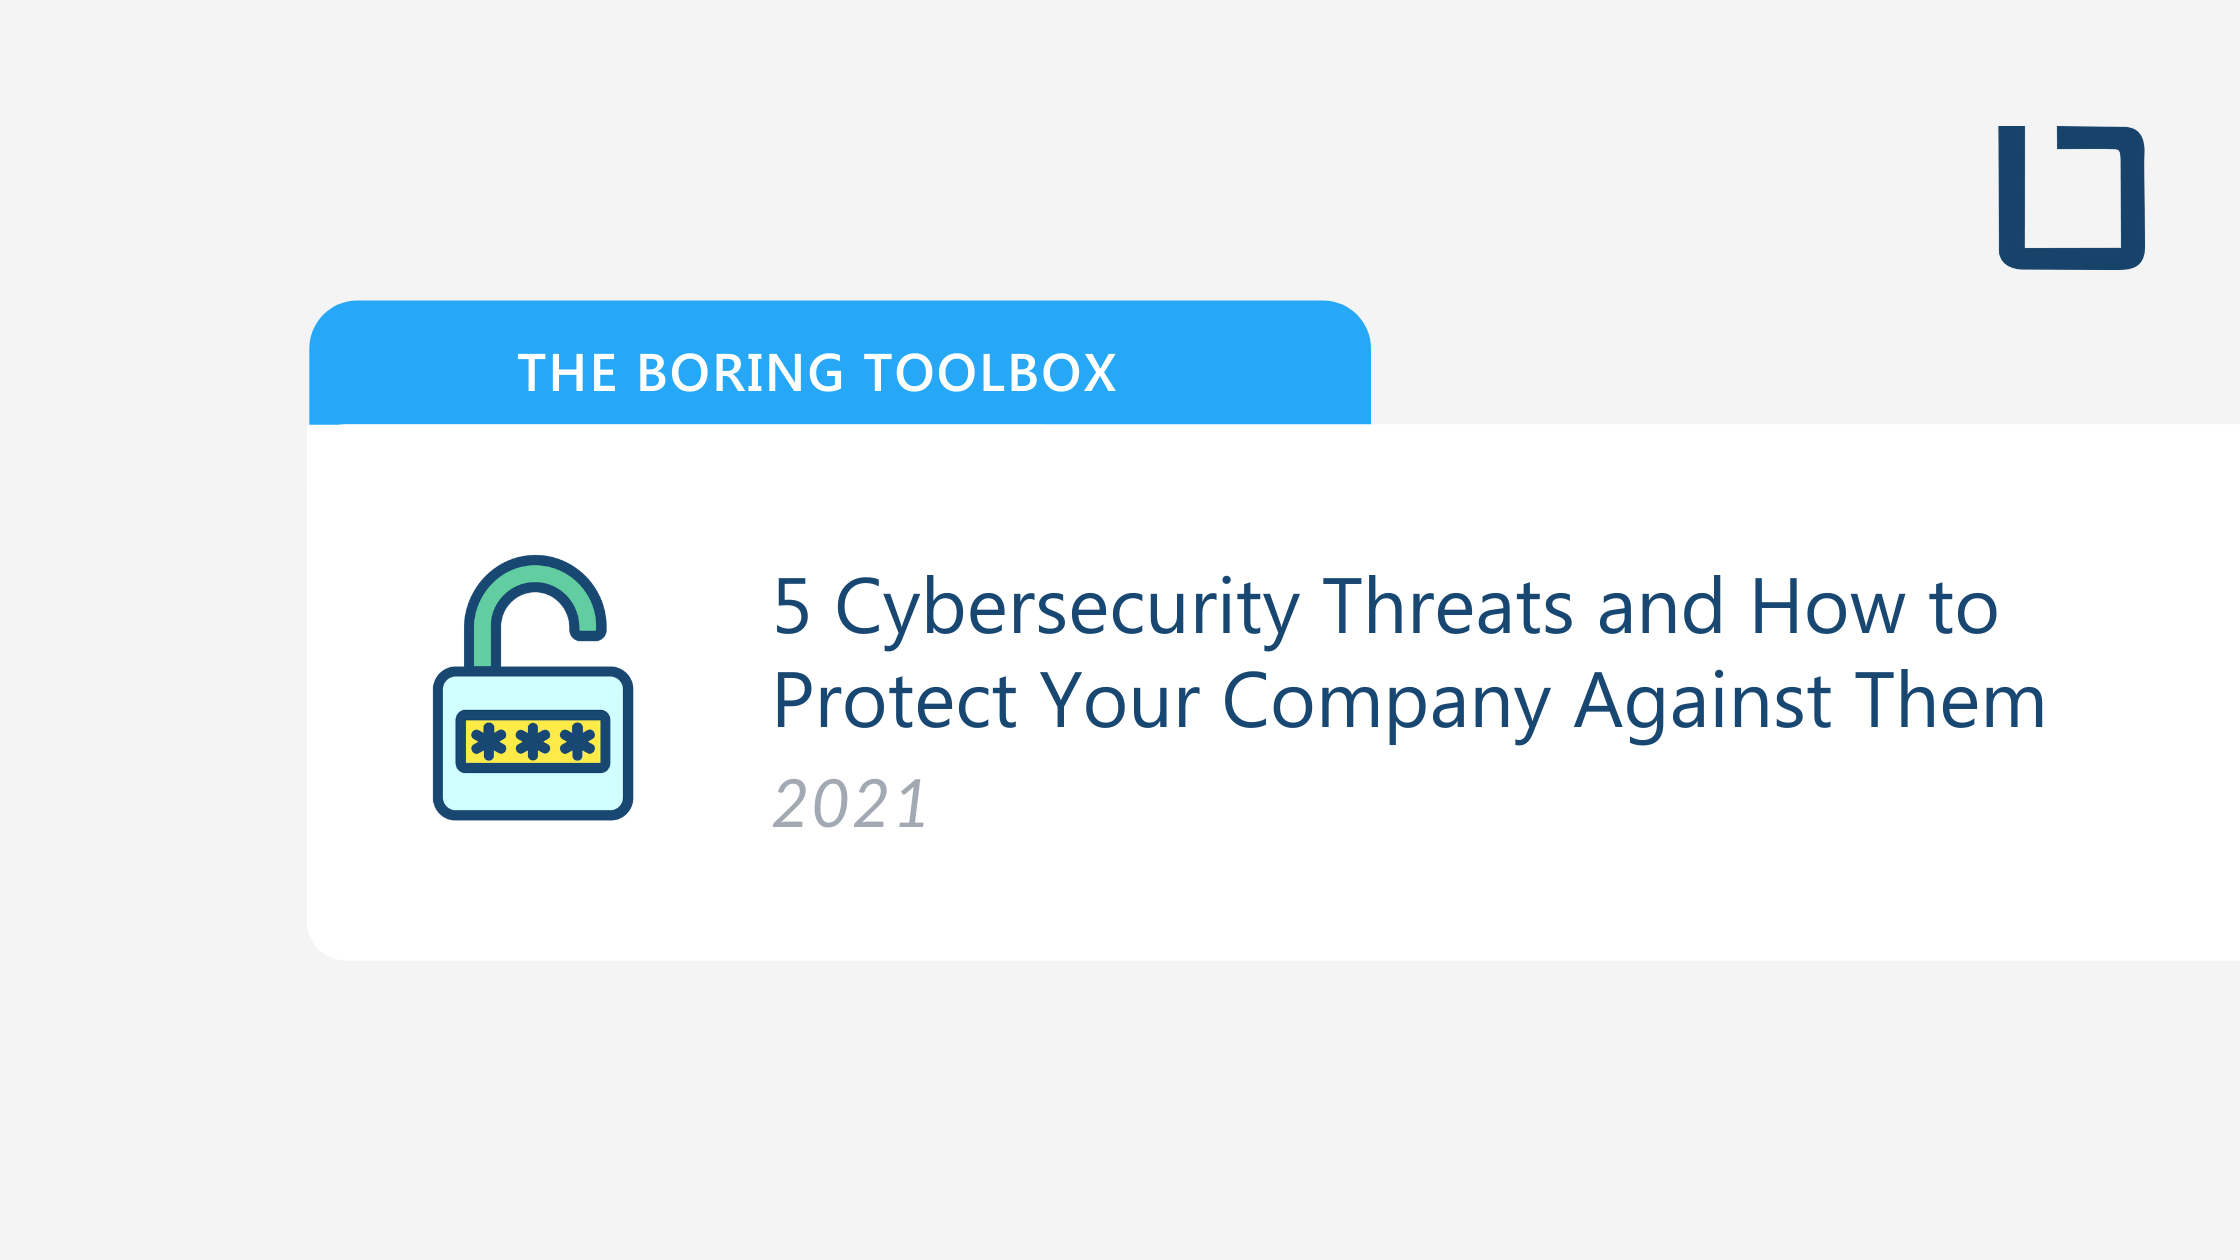 5 Cybersecurity Threats to Your Company and How to Protect Against Them (2021)